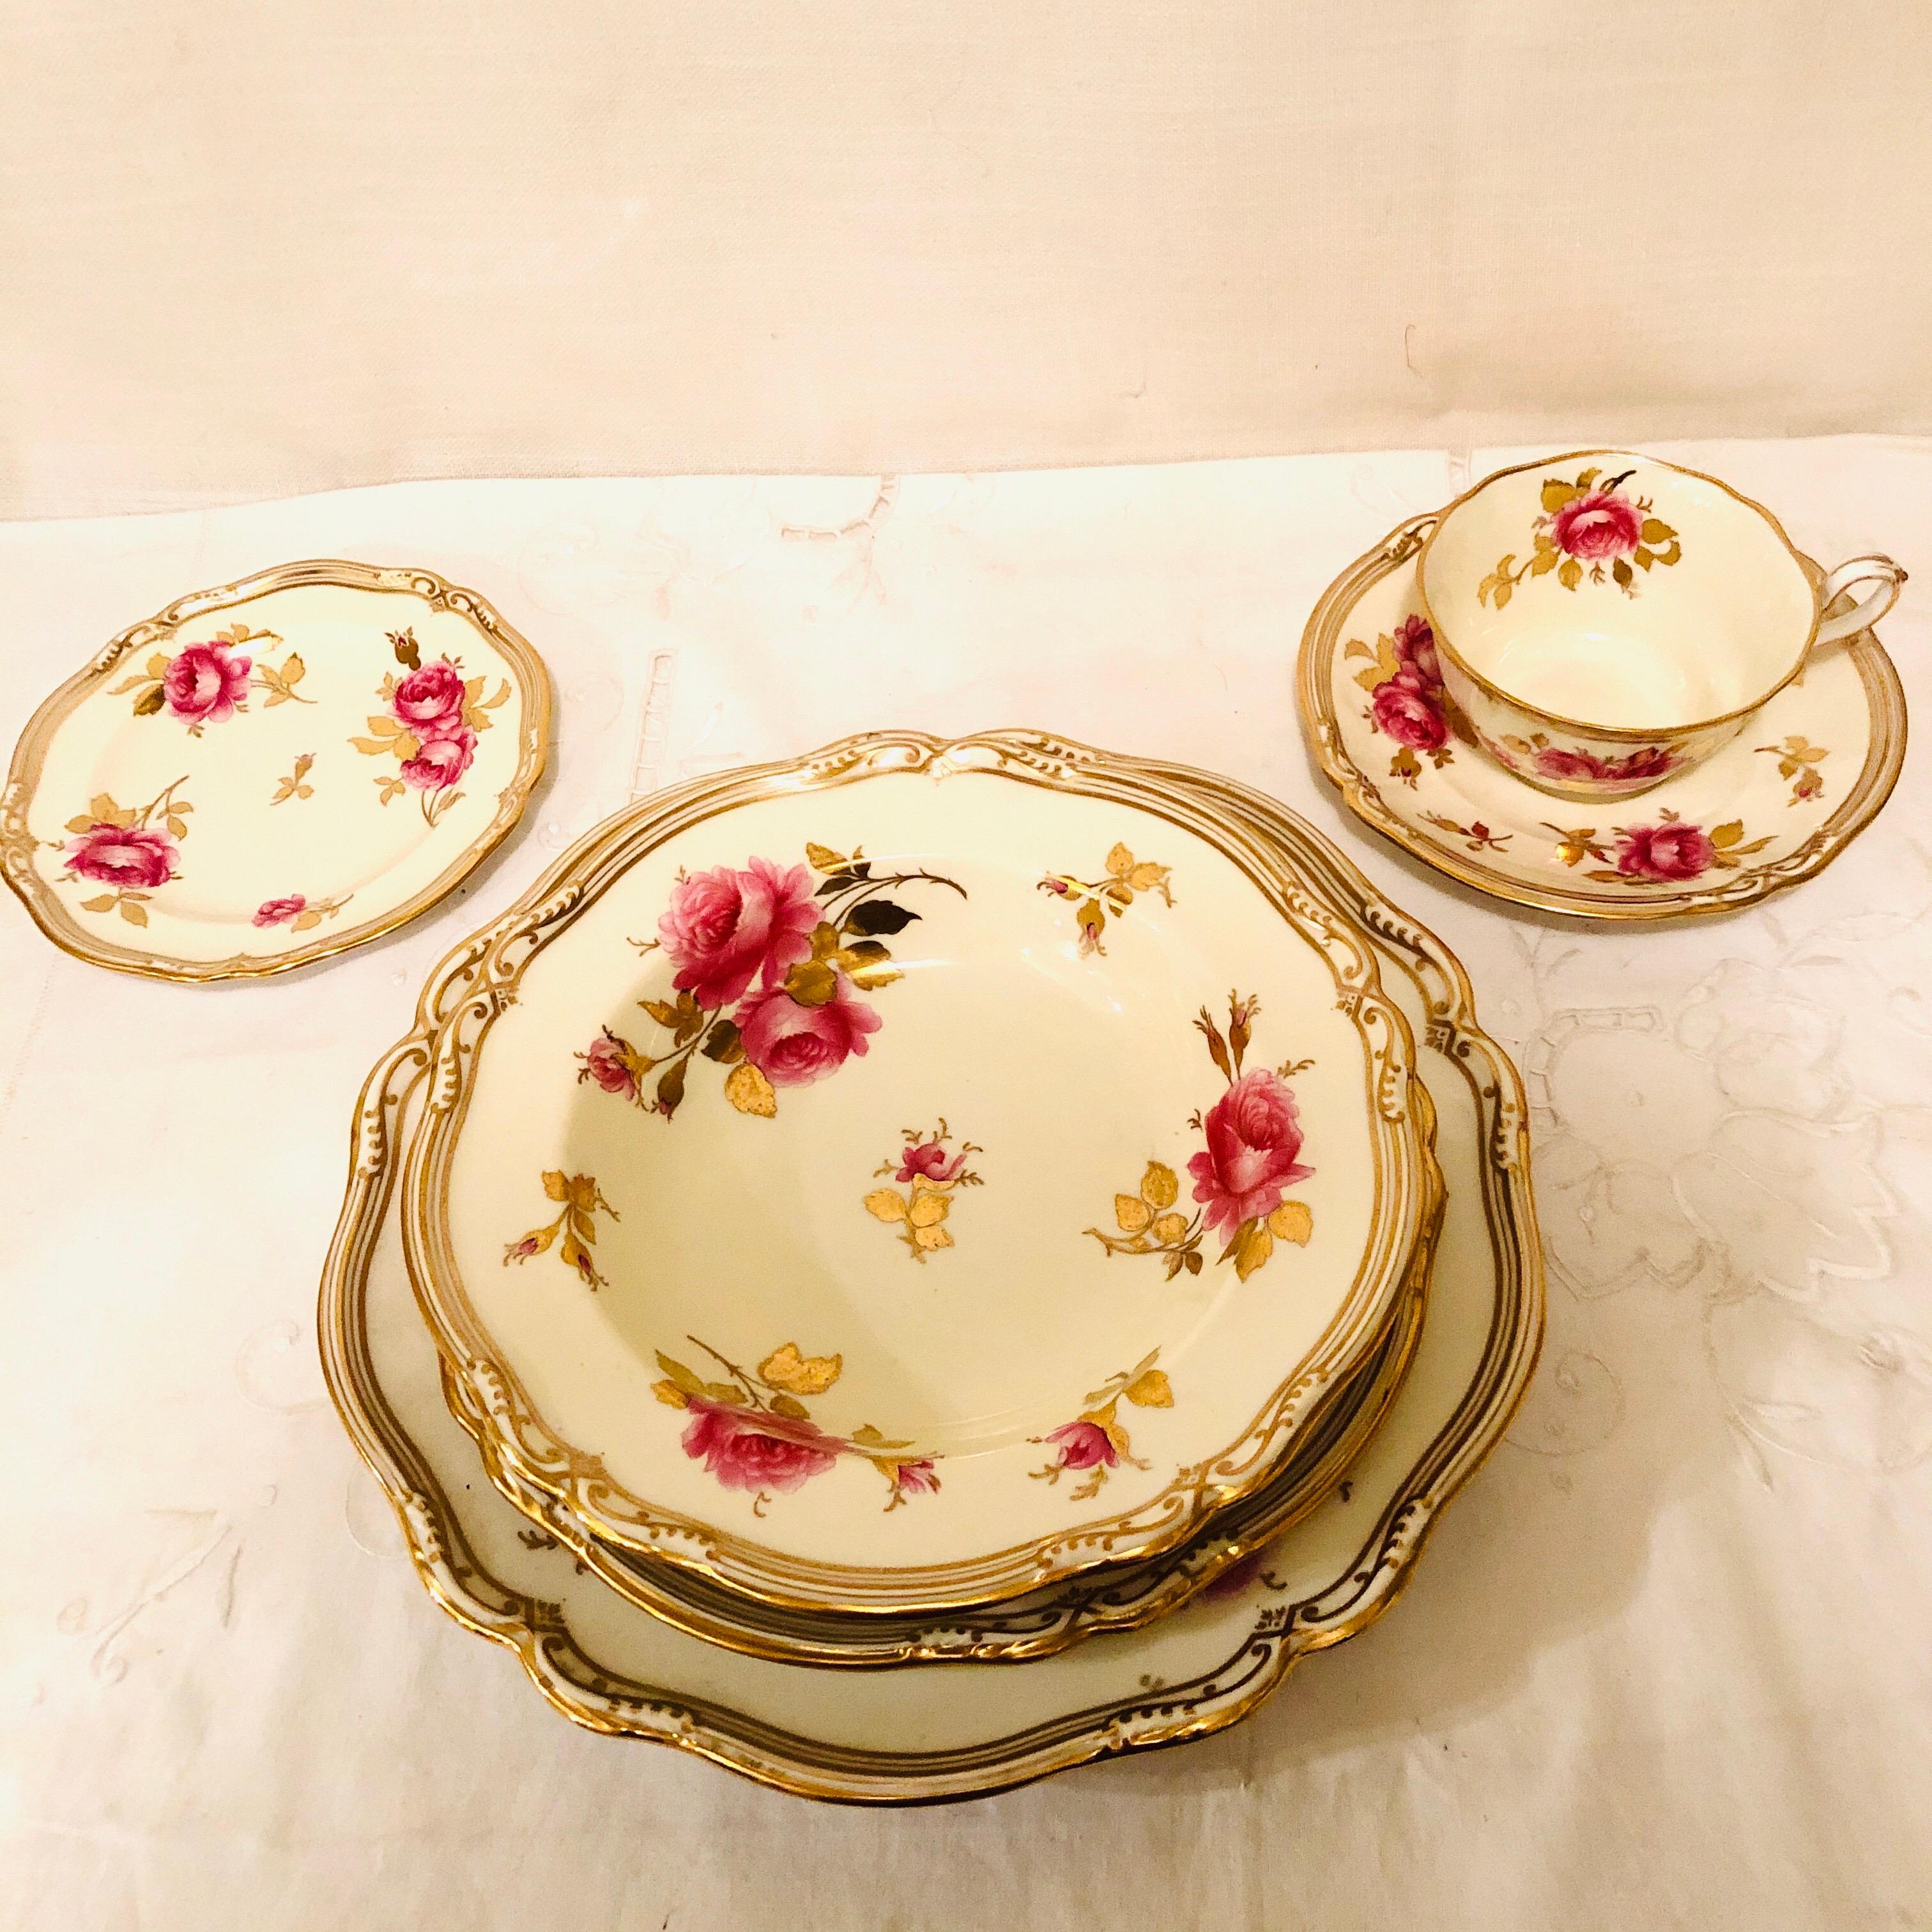 Rococo Spode Made for Tiffany 66 Piece Dinner Service Decorated with Large Pink Roses